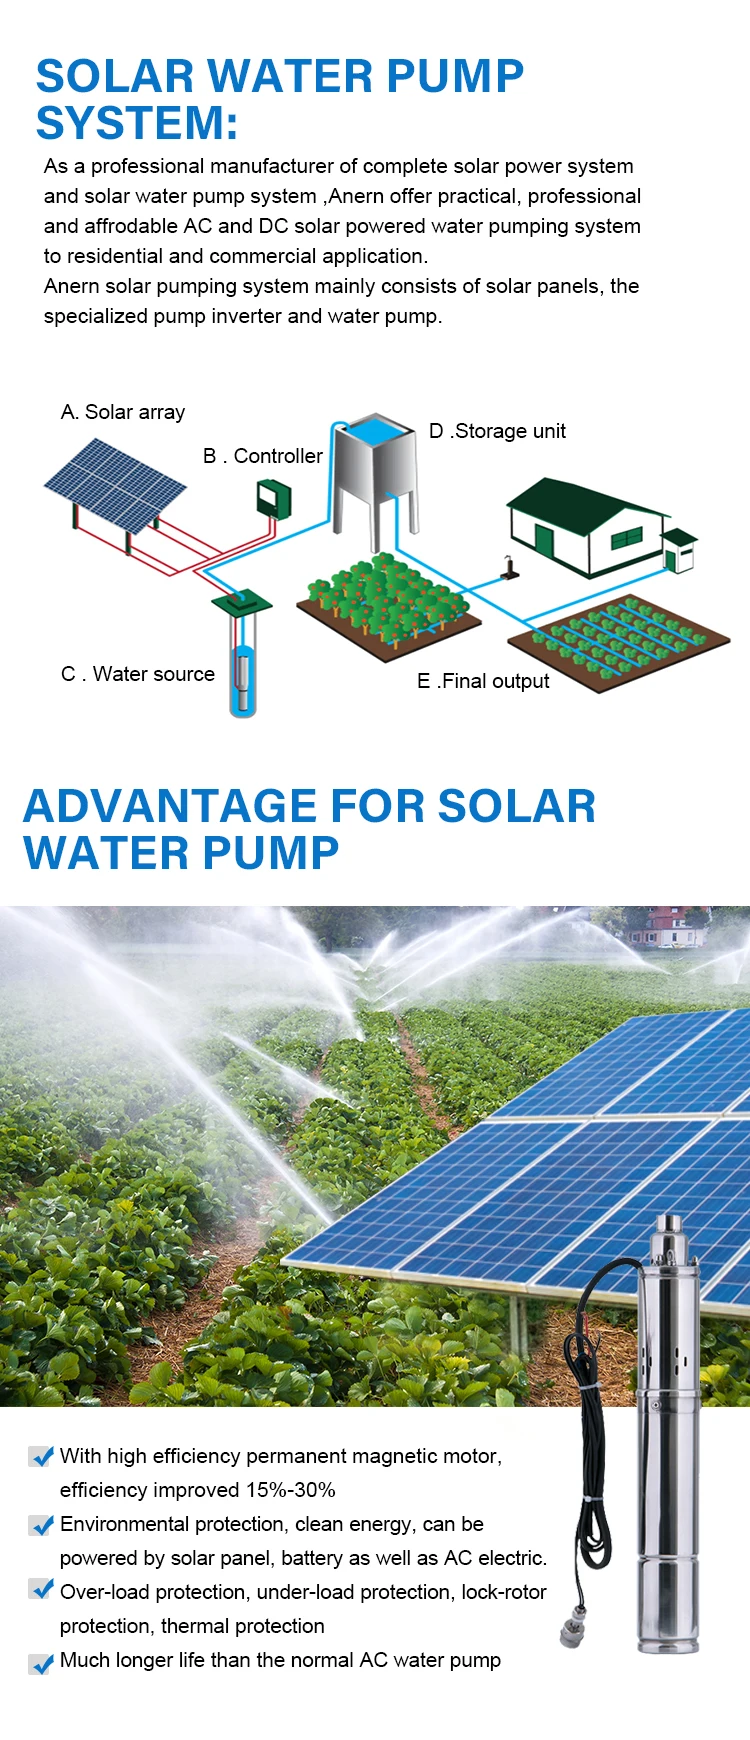 Deep Well Submersible Dc Solar Water Pump System 1Hp 2Hp 3Hp With 3 Years Warranty Eco Friendly - Solar Water Pumb - 2